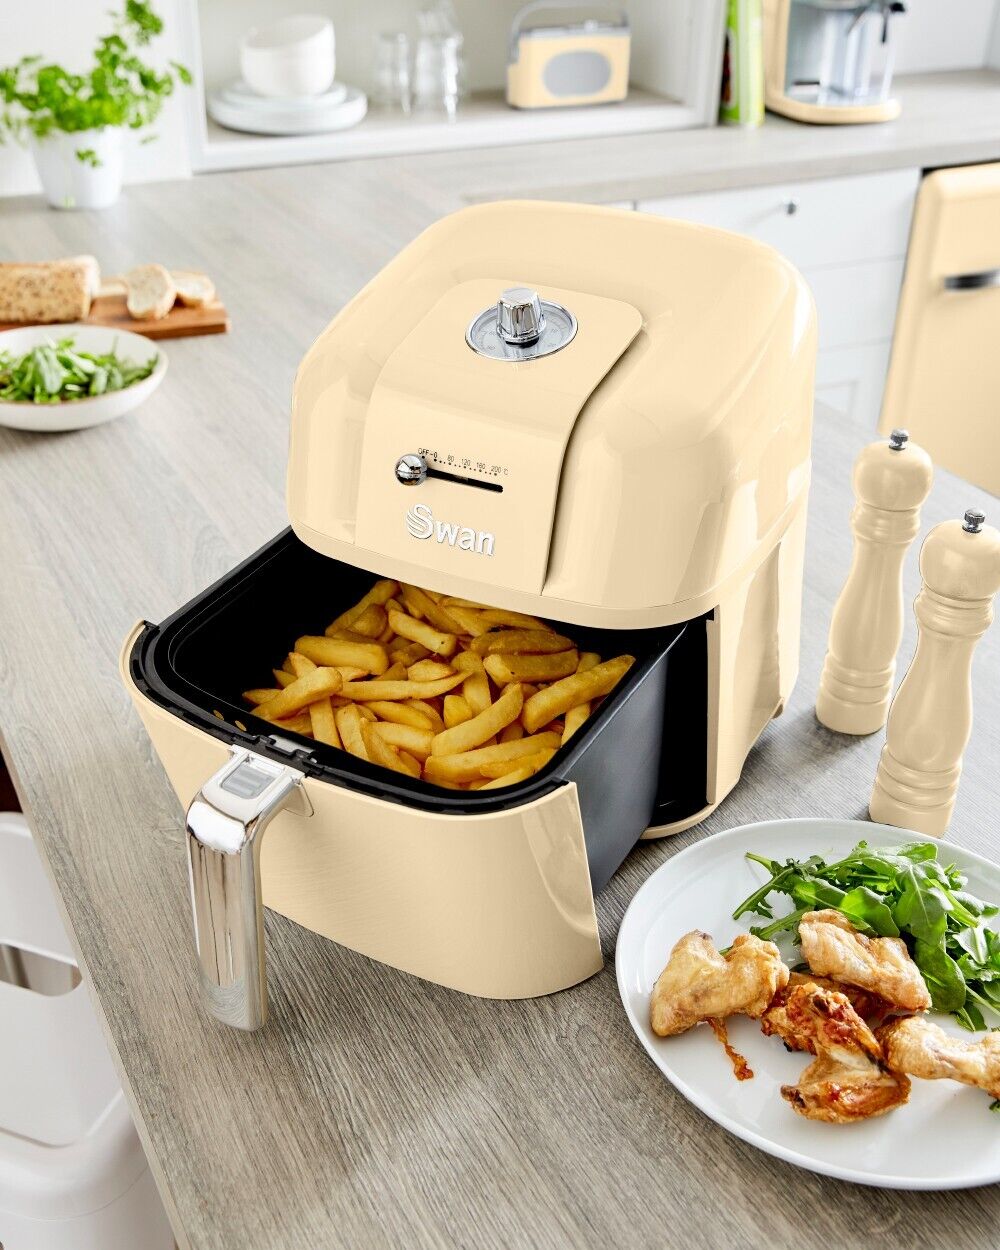 Swan Retro Air Fryer 6L in Cream Healthy Energy Efficient Cooking for the Family